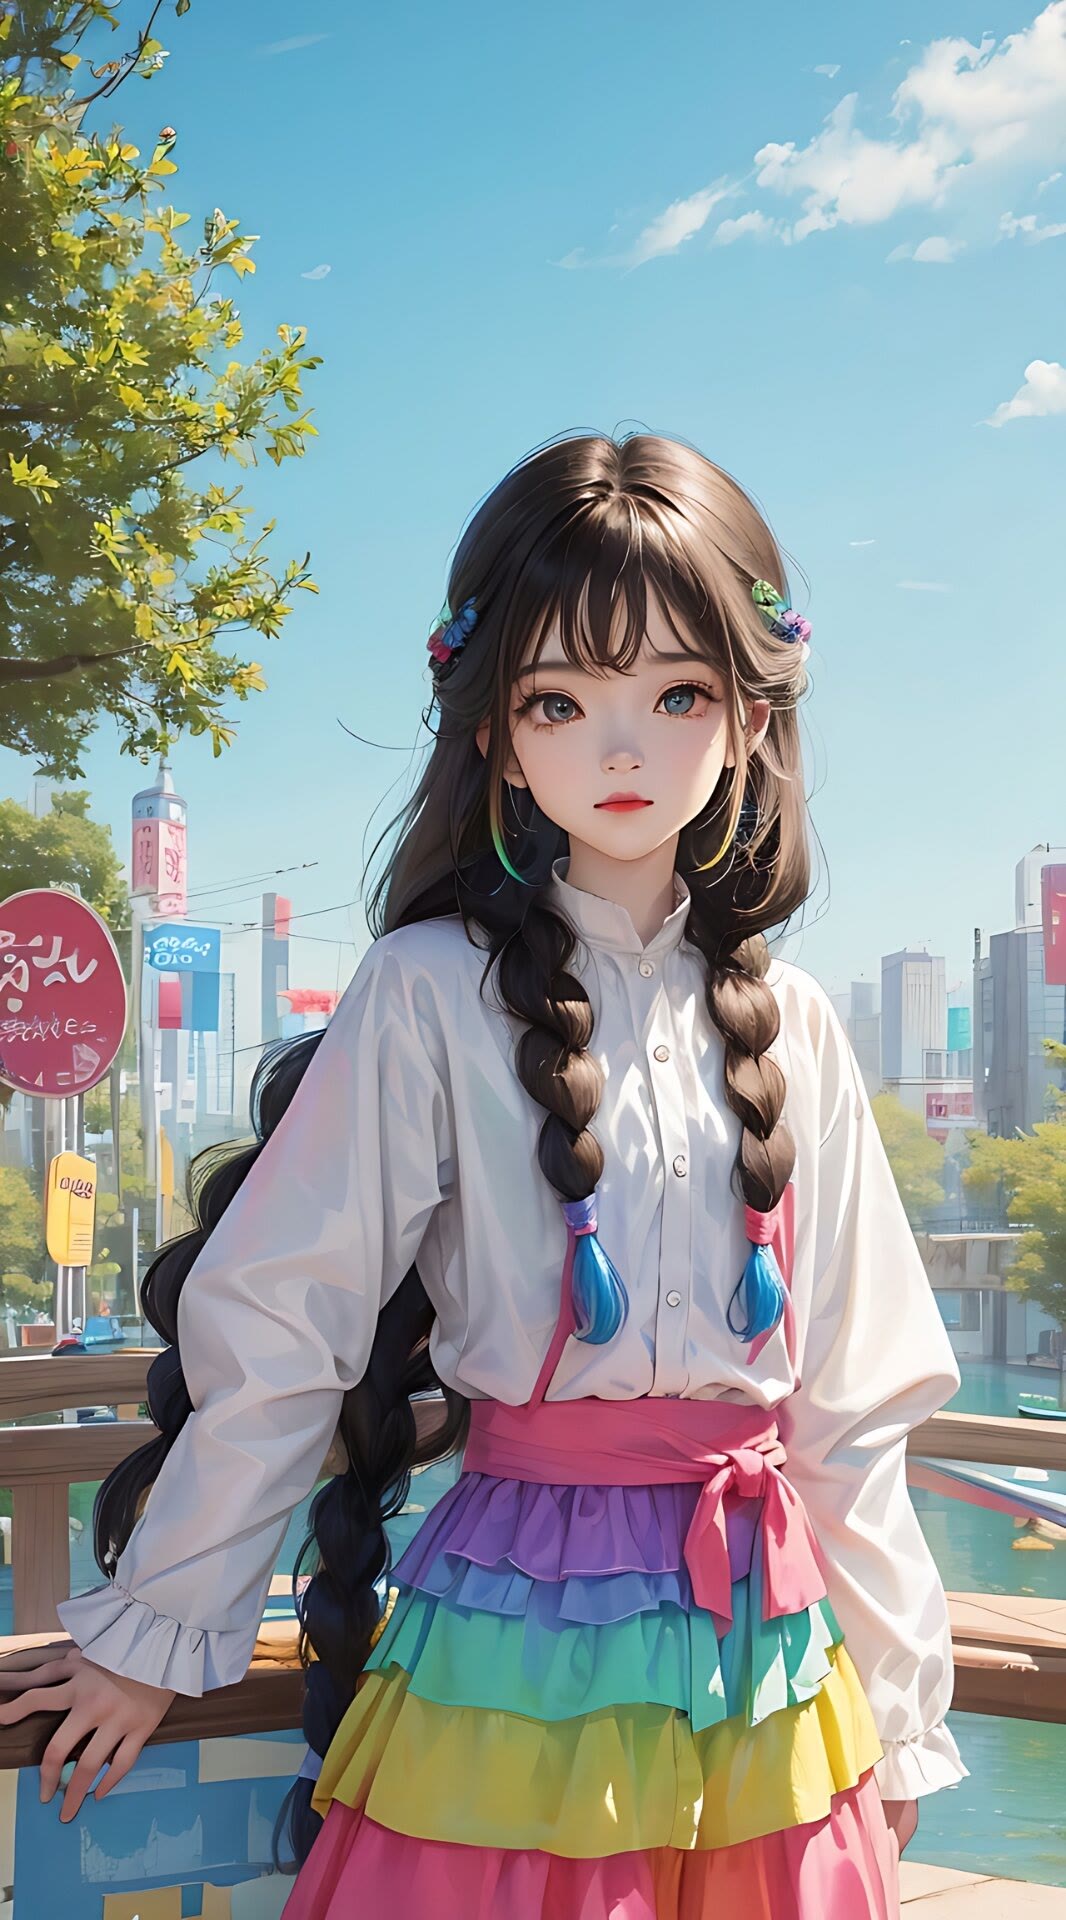 Anime 1066x1920 AI art Asian women colorful portrait display braids twintails looking at viewer sky clouds city